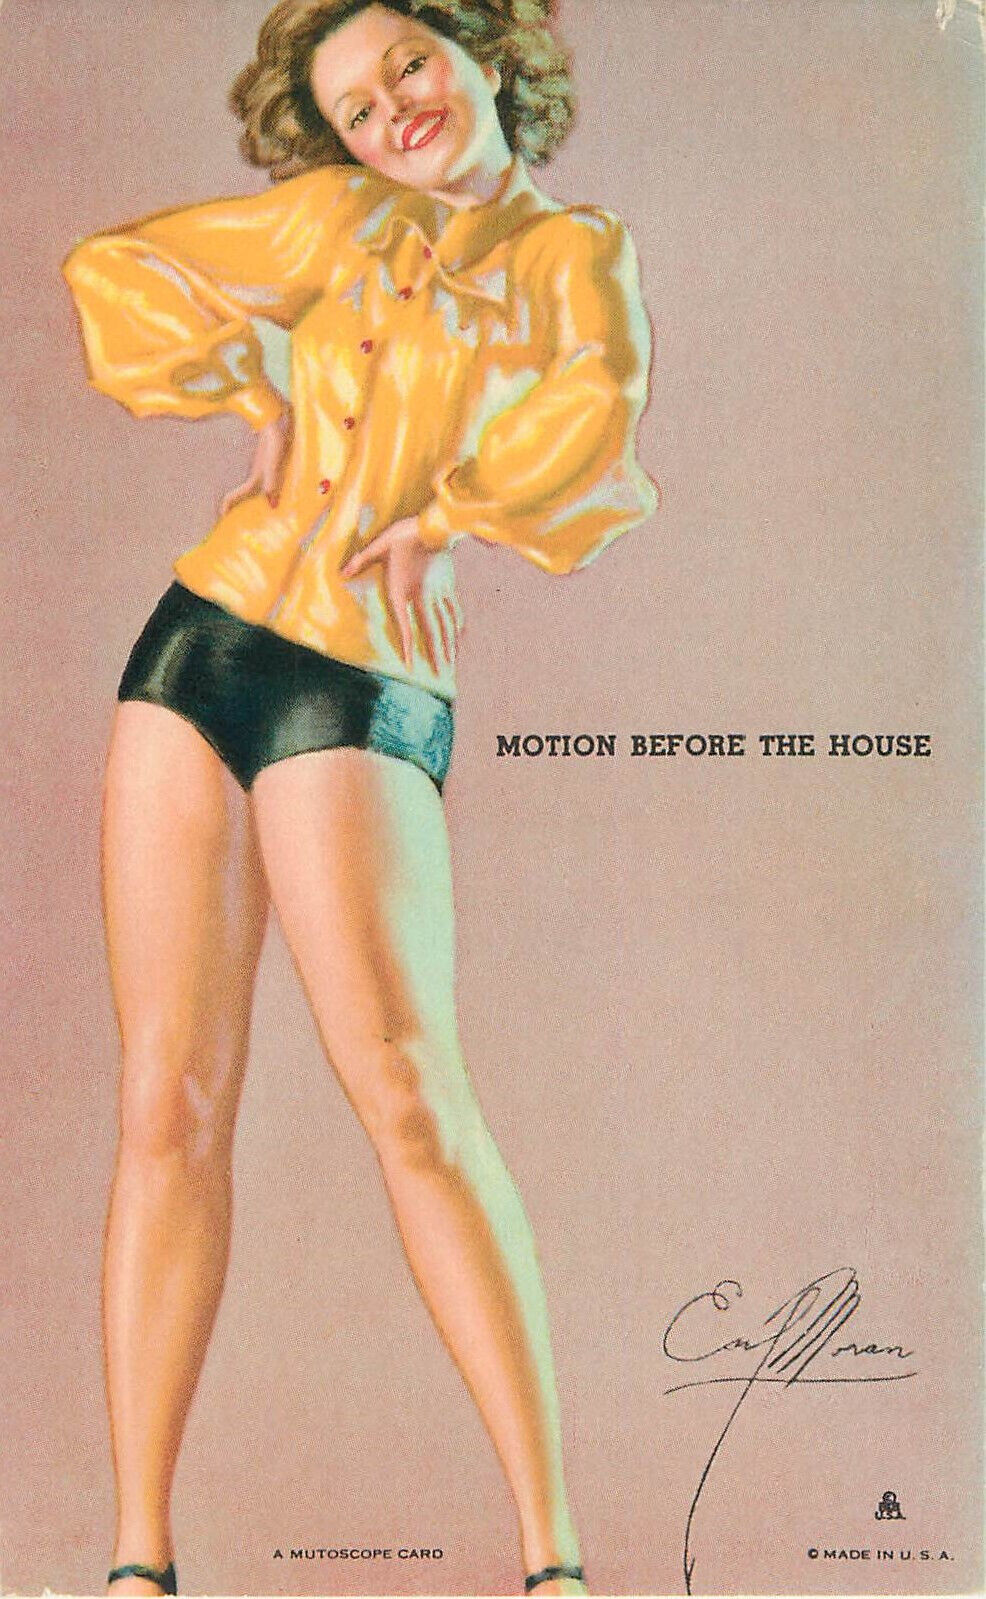 Mutoscope Card 1943 Hot\'Cha Girls Motion before the House MS151* Earl Moran